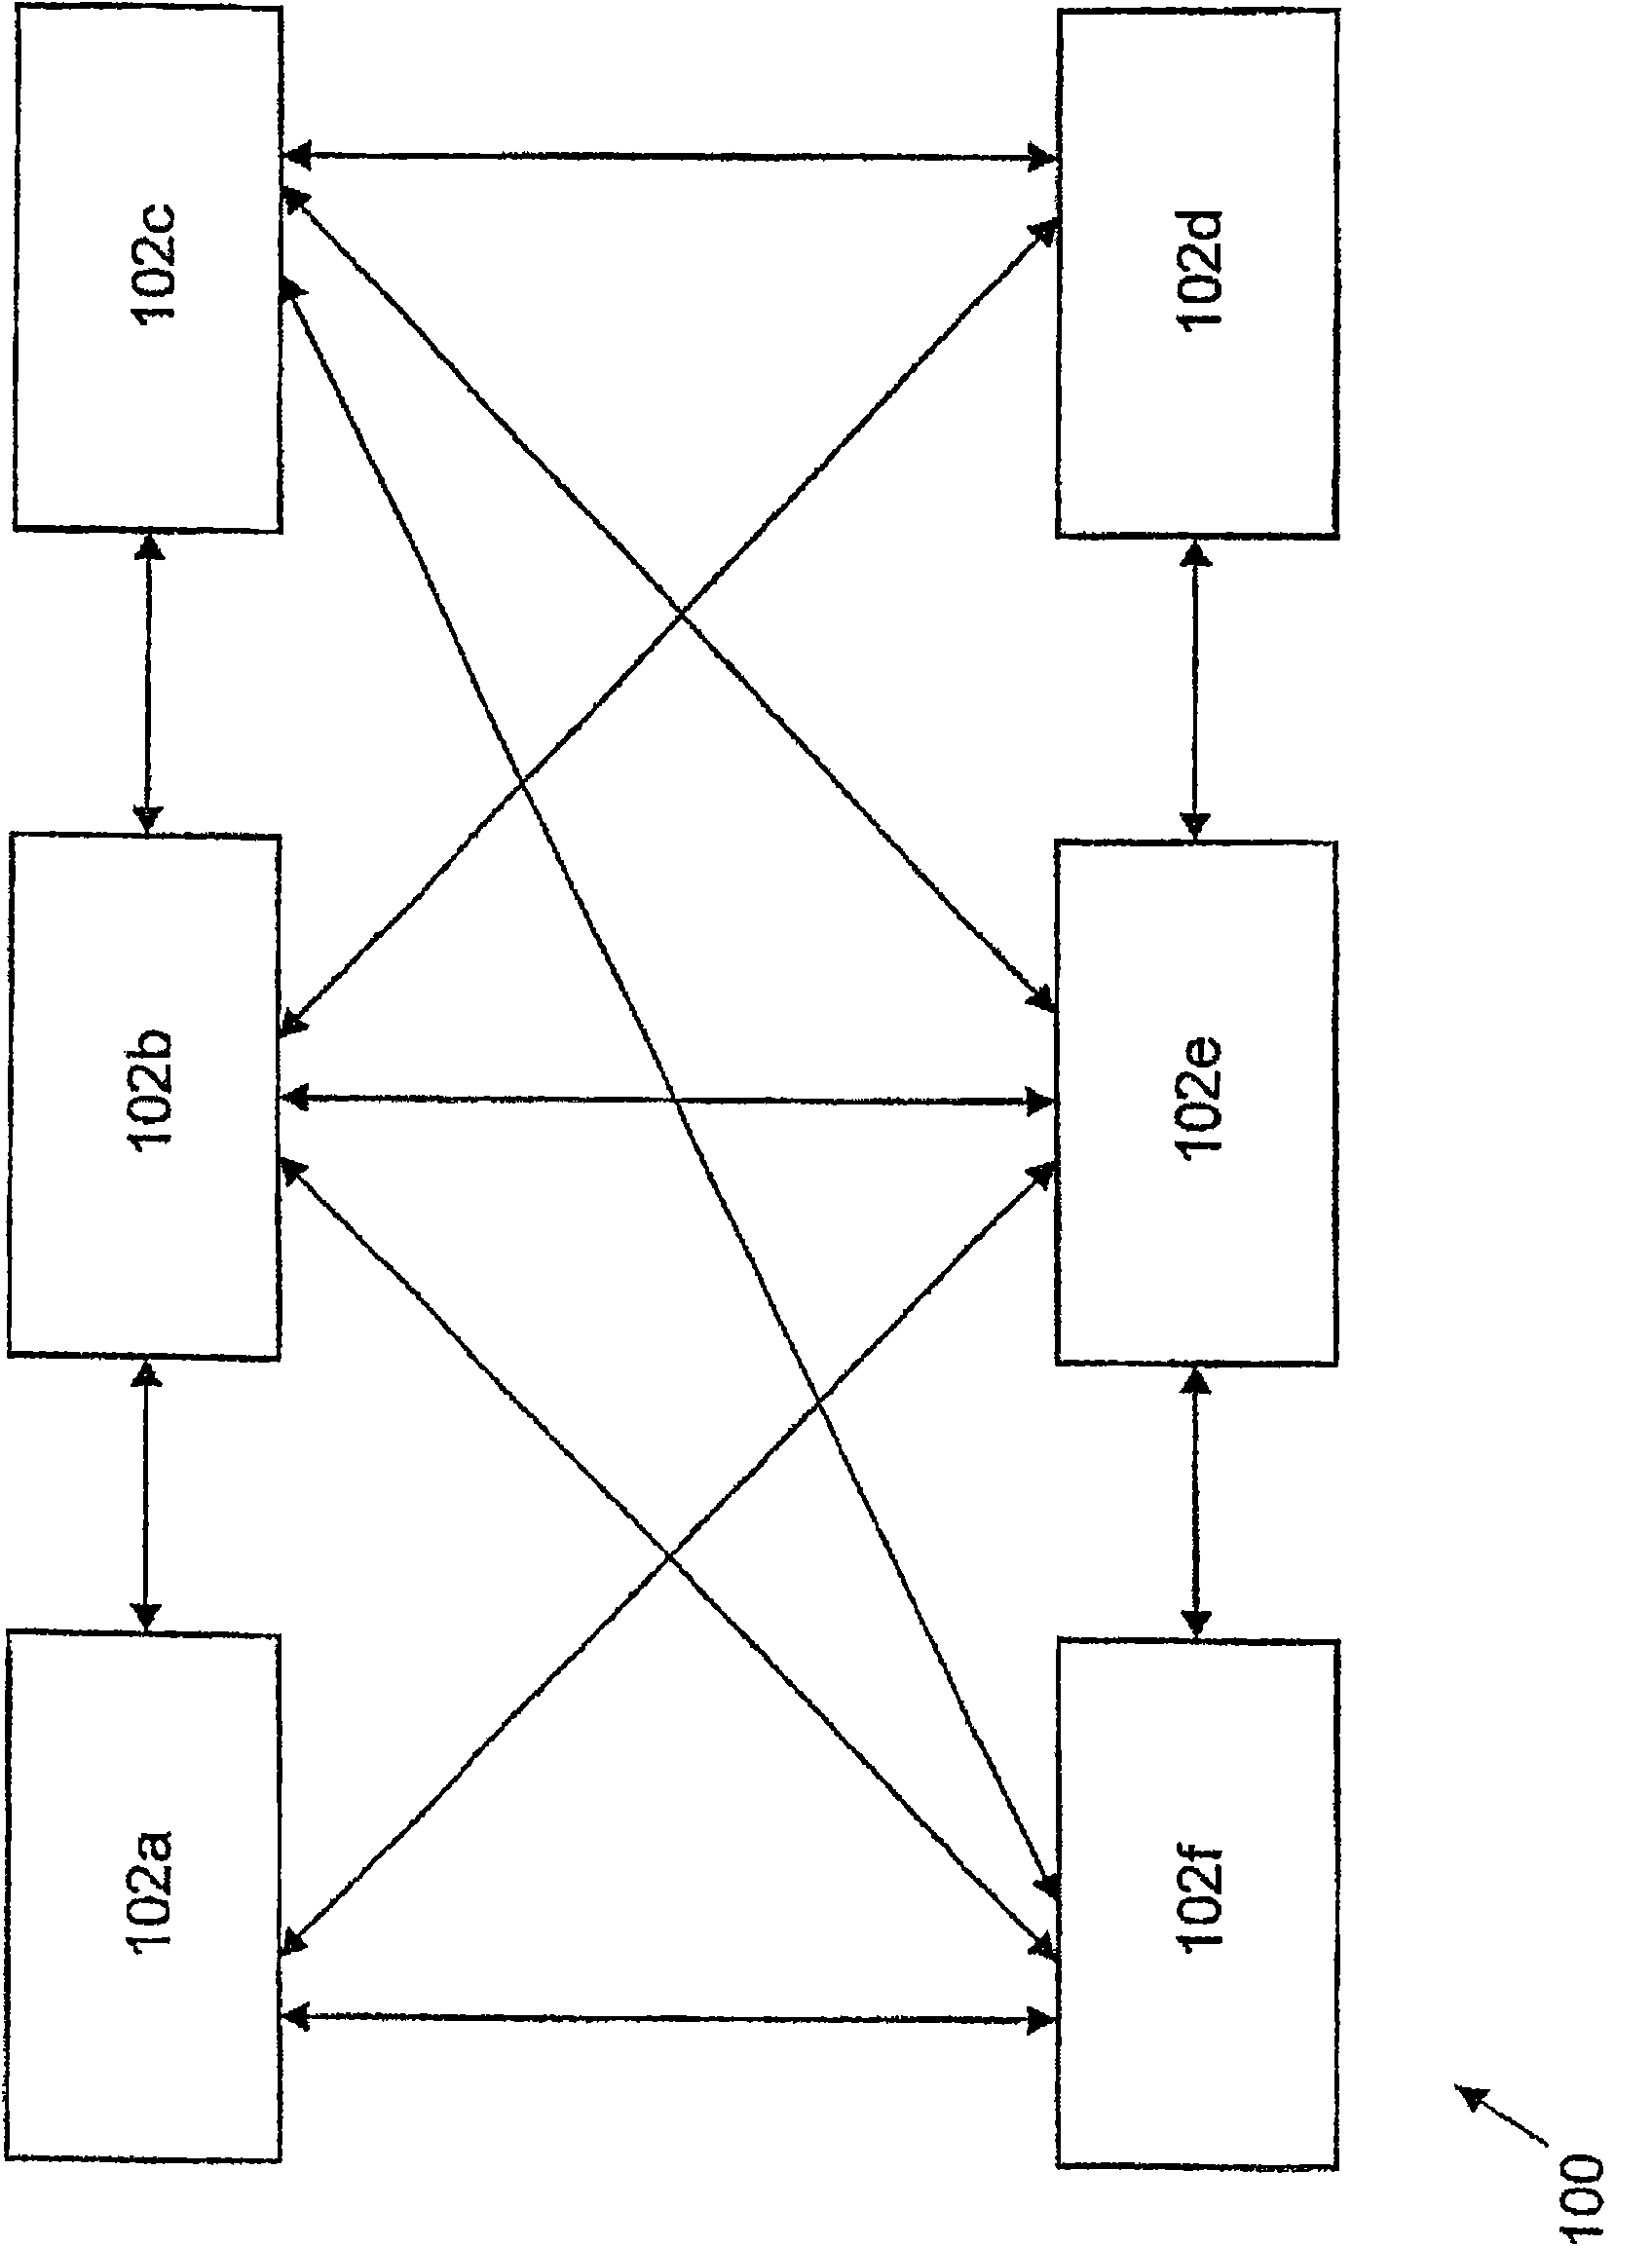 A method and apparatus for the delivery of digital data